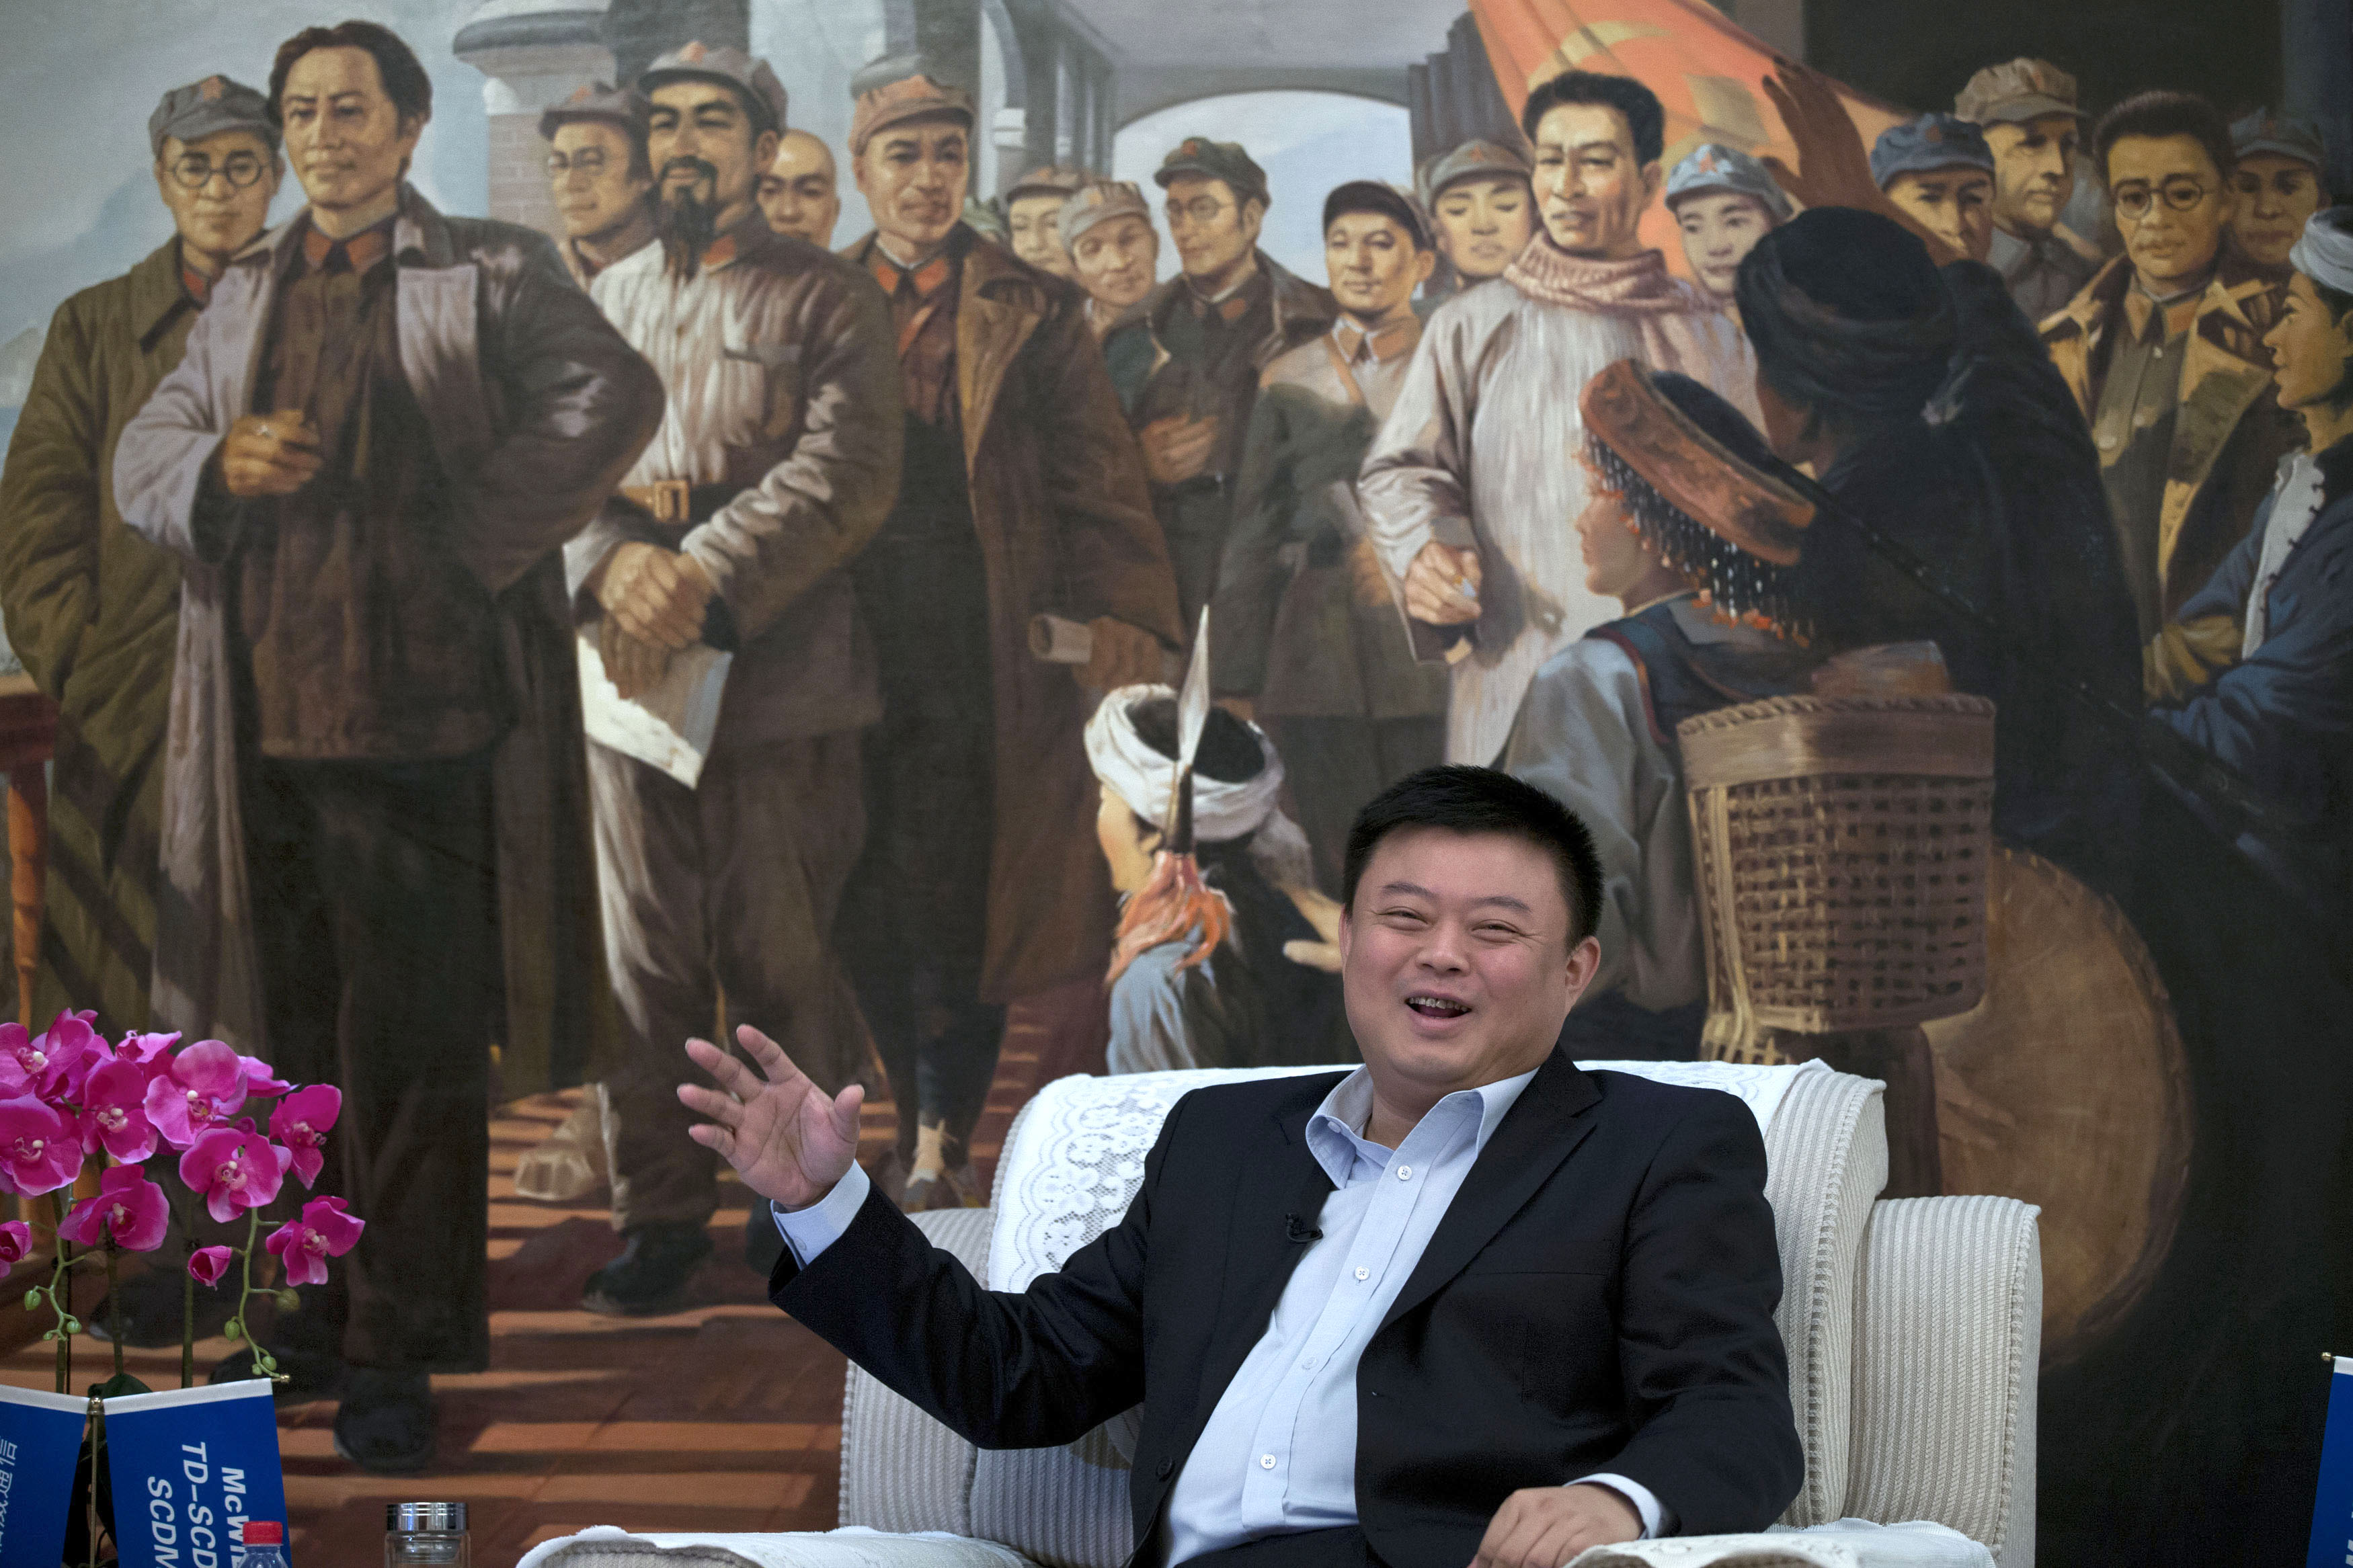 Chinese businessman Wang Jing shot to fame in June after securing rights from the Nicaraguan government to build and operate a US$40 billion shipping channel through the country to rival the Panama Canal. Photo: AP